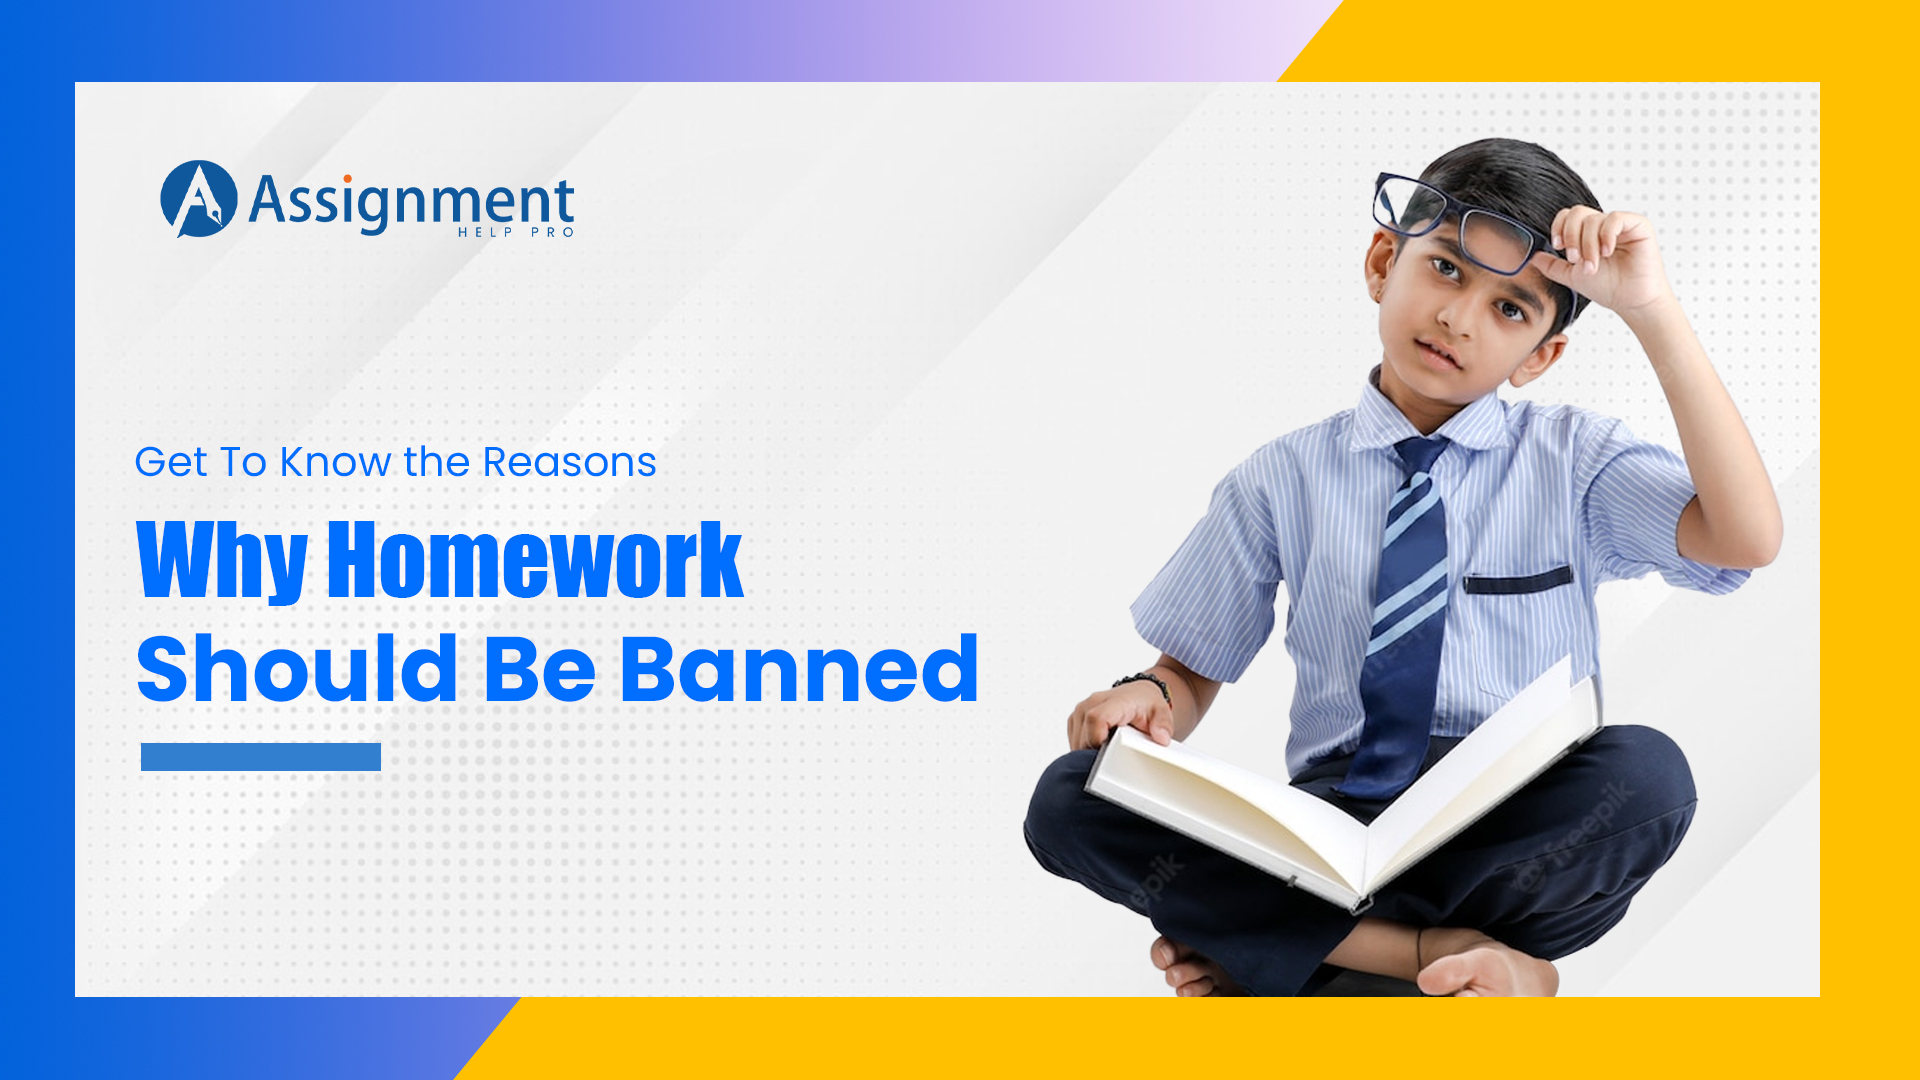 is homework actually going to be banned in ireland